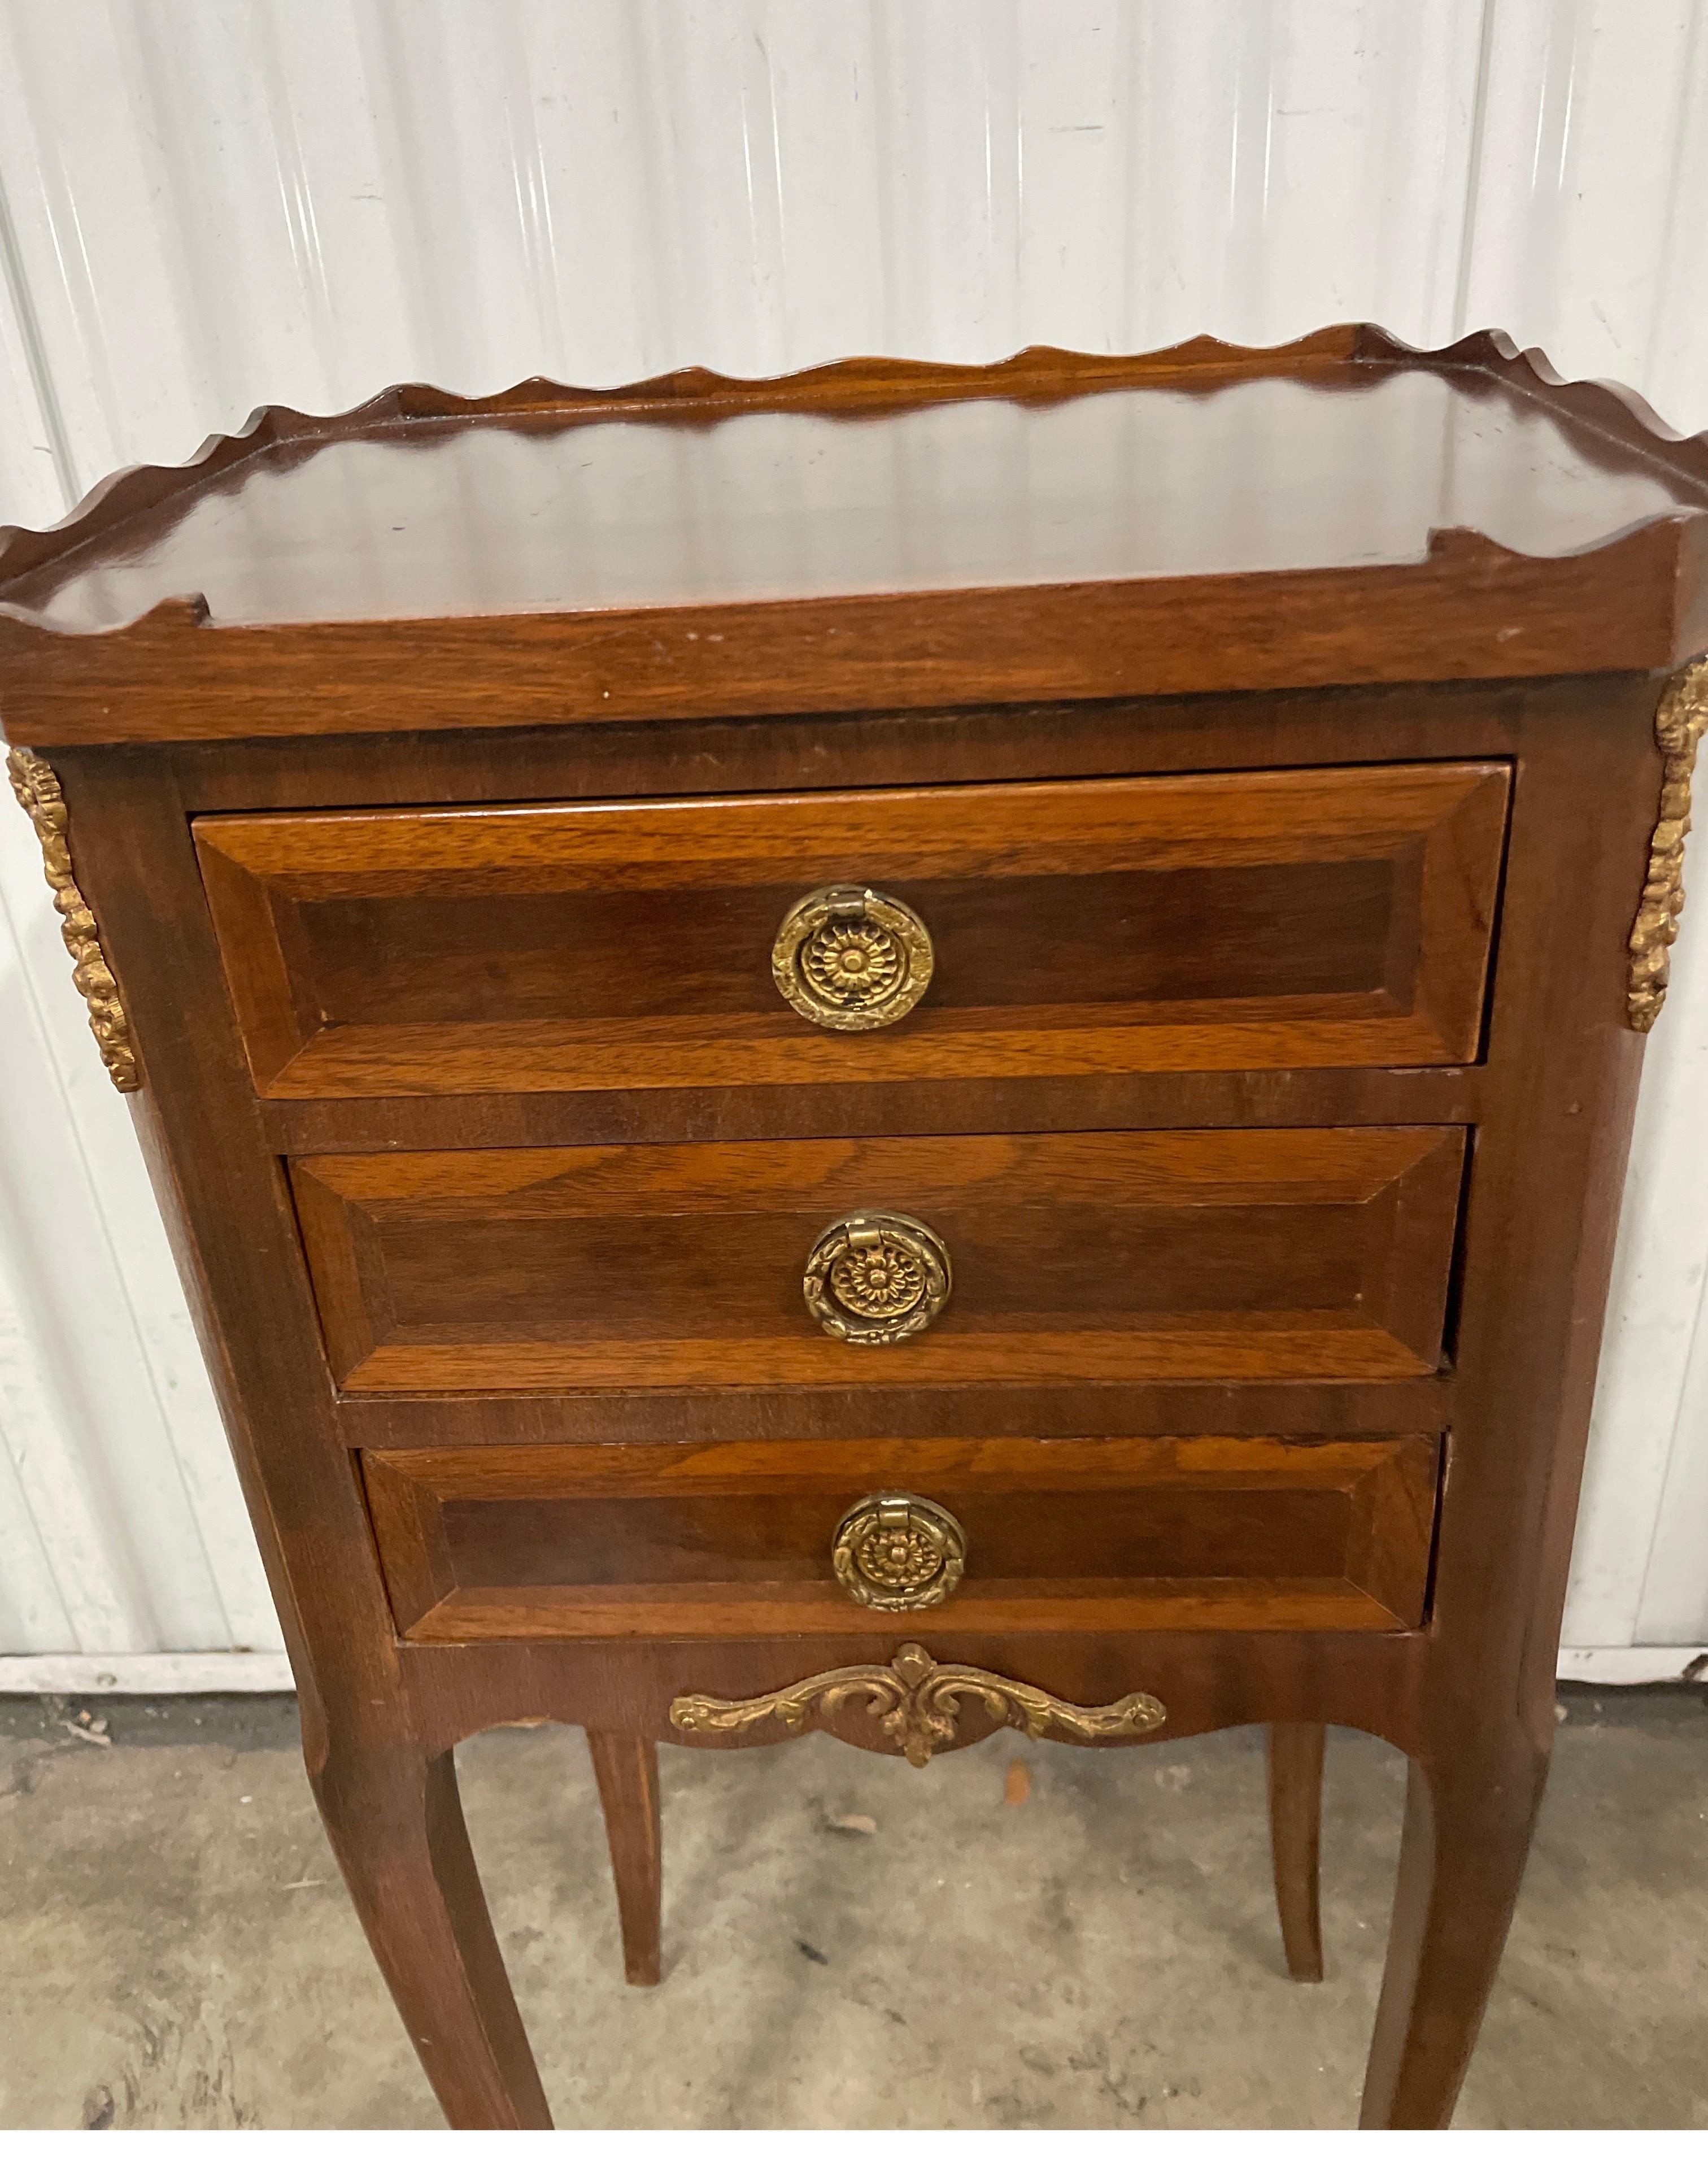 French Louis XV style petite three drawer chest with ormolu trim. Top has a scalloped edge Very nice inlaid details. Perfect little side table / drinks table.